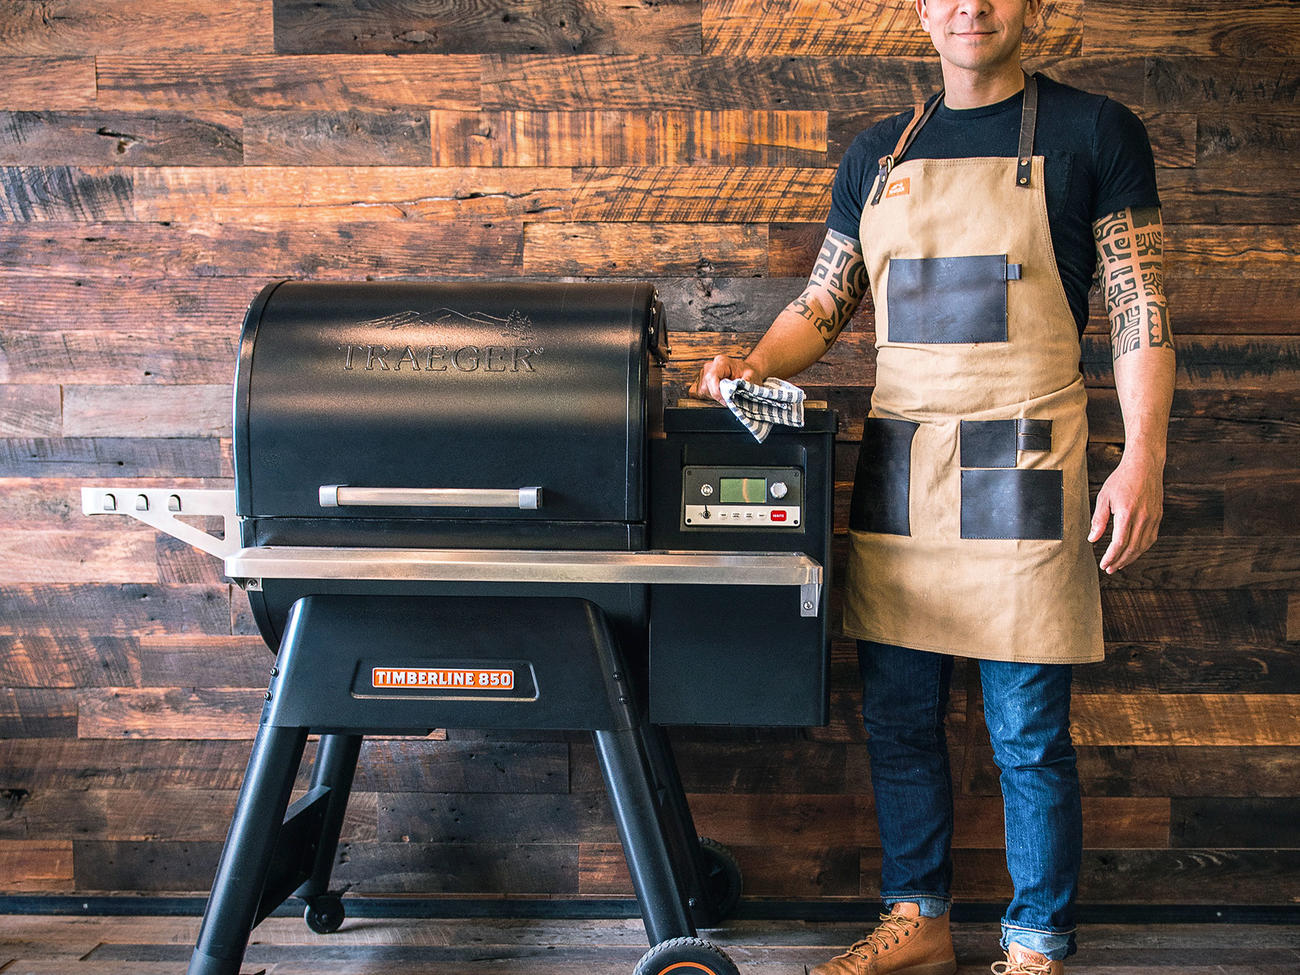 Win a High-Tech Grill Package!